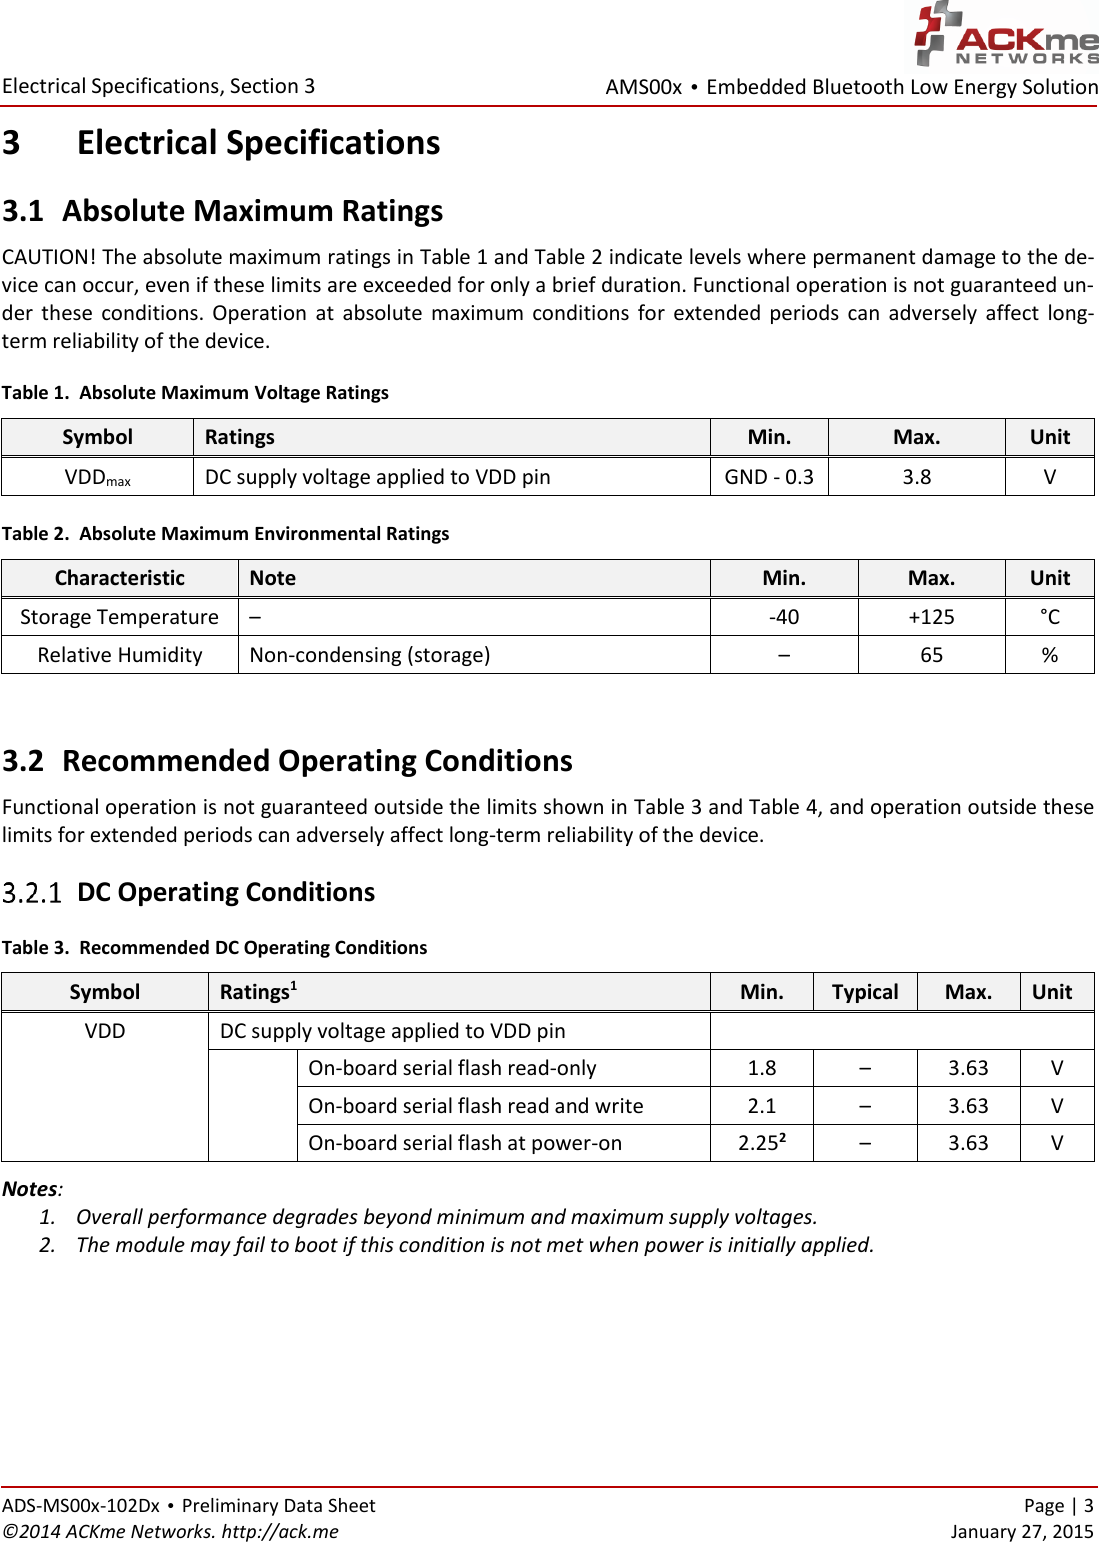 AMS00x • Embedded Bluetooth Low Energy Solution  Electrical Specifications, Section 3 ADS-MS00x-102Dx • Preliminary Data Sheet    Page | 3 ©2014 ACKme Networks. http://ack.me    January 27, 2015 3 Electrical Specifications 3.1 Absolute Maximum Ratings CAUTION! The absolute maximum ratings in Table 1 and Table 2 indicate levels where permanent damage to the de-vice can occur, even if these limits are exceeded for only a brief duration. Functional operation is not guaranteed un-der  these  conditions.  Operation  at  absolute  maximum  conditions for  extended  periods  can  adversely  affect  long-term reliability of the device. Table 1.  Absolute Maximum Voltage Ratings Symbol Ratings Min. Max. Unit VDDmax DC supply voltage applied to VDD pin GND - 0.3 3.8 V Table 2.  Absolute Maximum Environmental Ratings Characteristic Note Min. Max. Unit Storage Temperature –  -40 +125 °C Relative Humidity Non-condensing (storage) – 65 %  3.2 Recommended Operating Conditions Functional operation is not guaranteed outside the limits shown in Table 3 and Table 4, and operation outside these limits for extended periods can adversely affect long-term reliability of the device.  DC Operating Conditions Table 3.  Recommended DC Operating Conditions Symbol Ratings1 Min. Typical Max. Unit VDD DC supply voltage applied to VDD pin   On-board serial flash read-only 1.8 – 3.63 V On-board serial flash read and write 2.1 – 3.63 V On-board serial flash at power-on 2.252 – 3.63 V Notes:  1. Overall performance degrades beyond minimum and maximum supply voltages. 2. The module may fail to boot if this condition is not met when power is initially applied.  